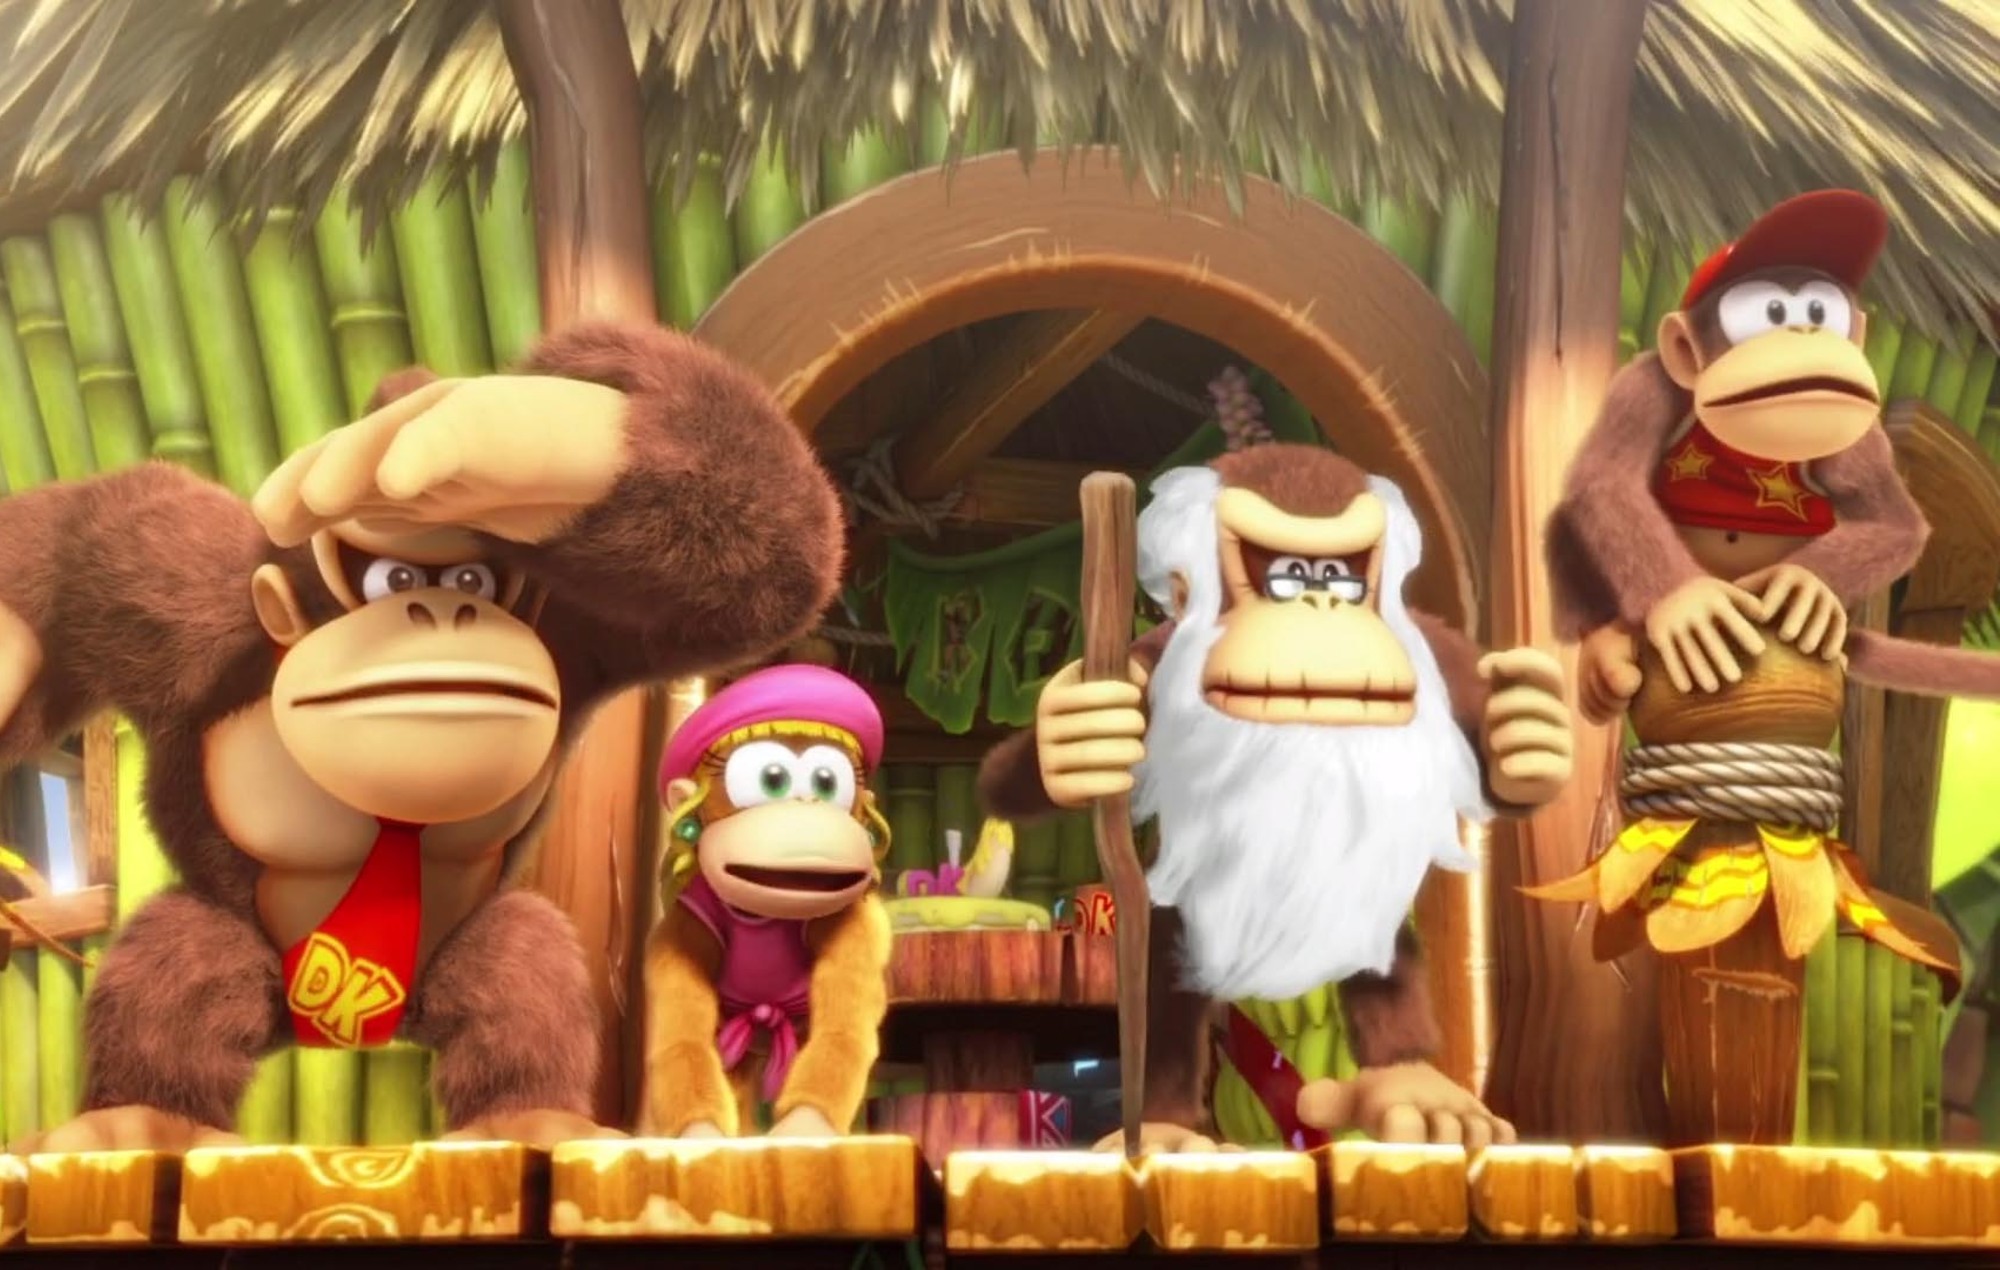 Donkey Kong was almost called something very different